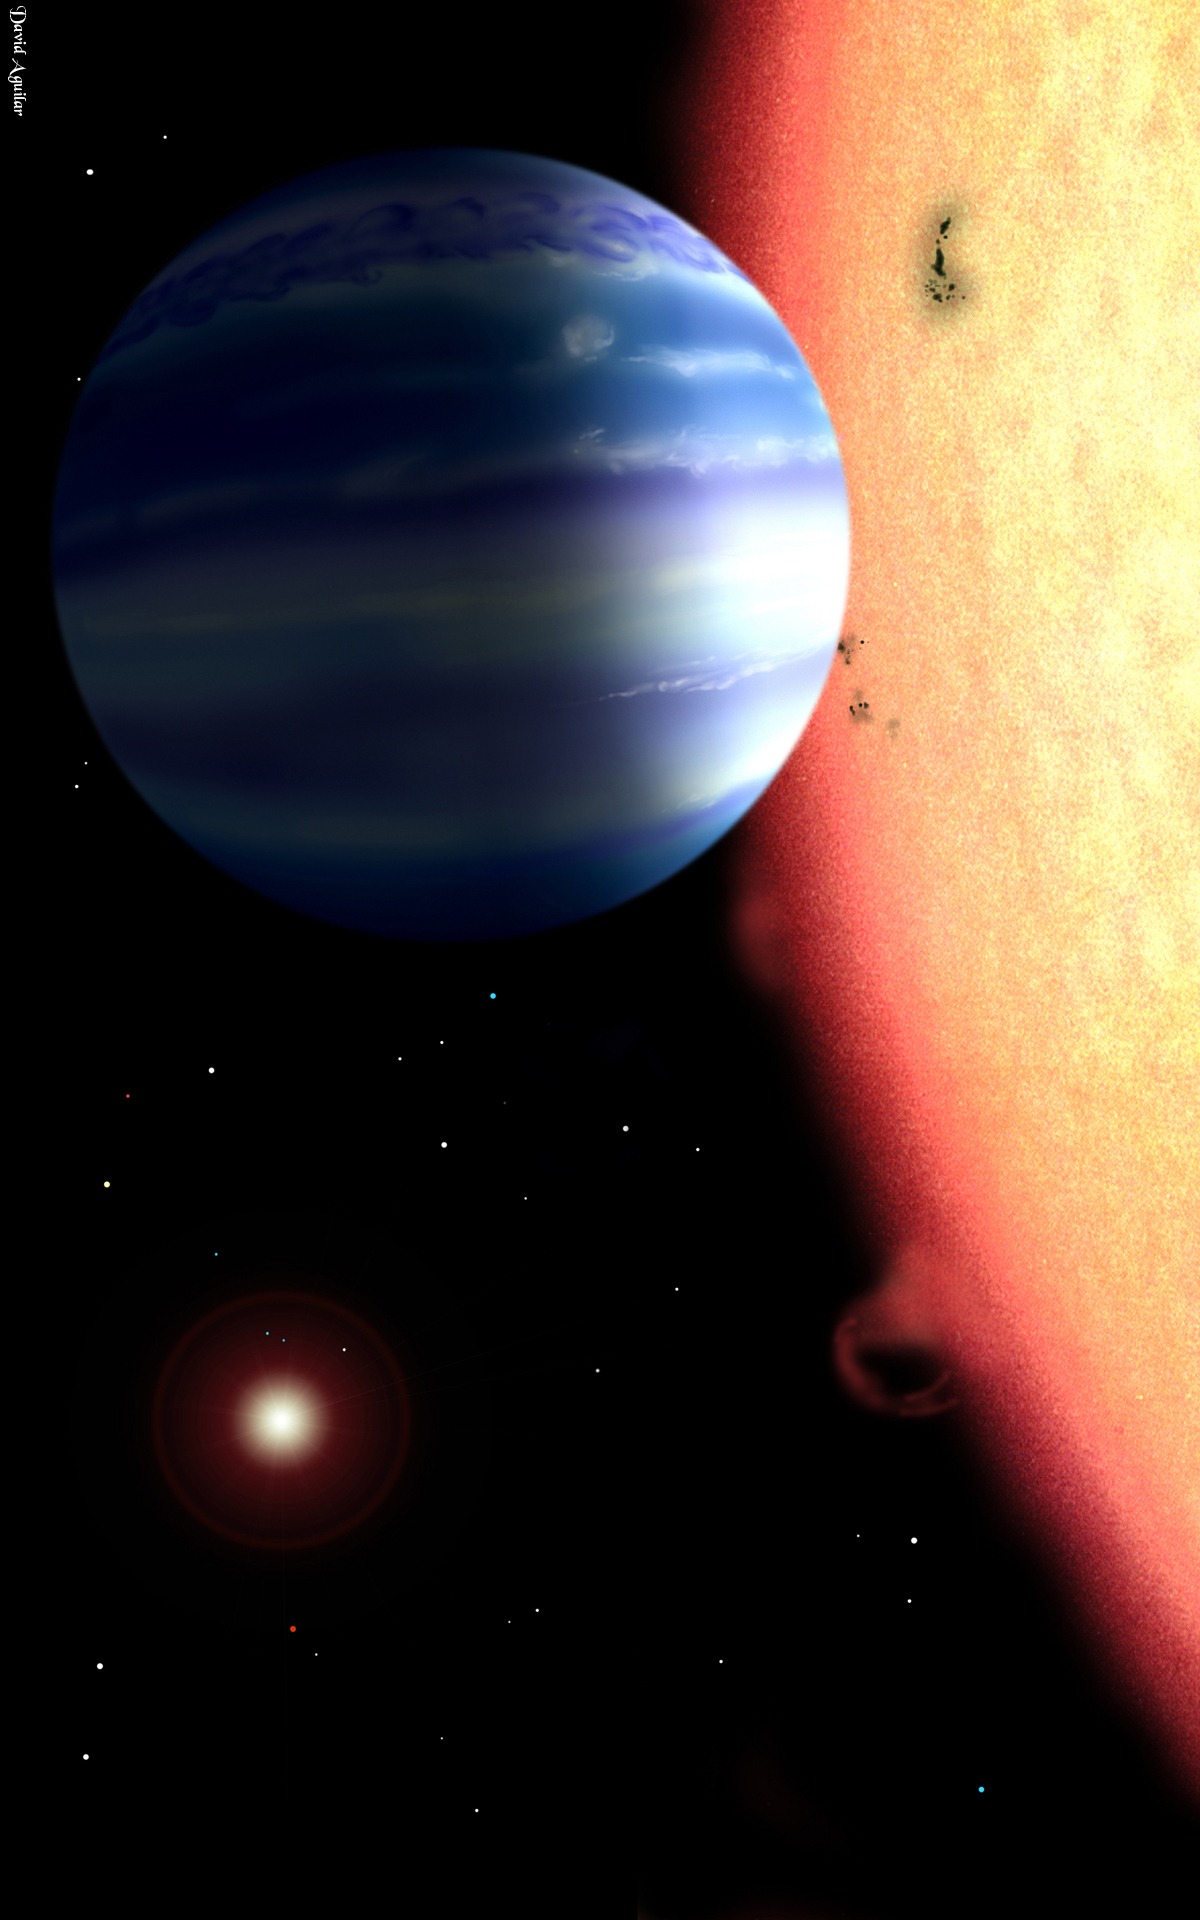 An artist's conception of a hot-Jupiter extrasolar planet orbiting a star similar to tau Boötes. (Image used with permission of David Aguilar, Harvard-Smithsonian Center for Astrophysics)